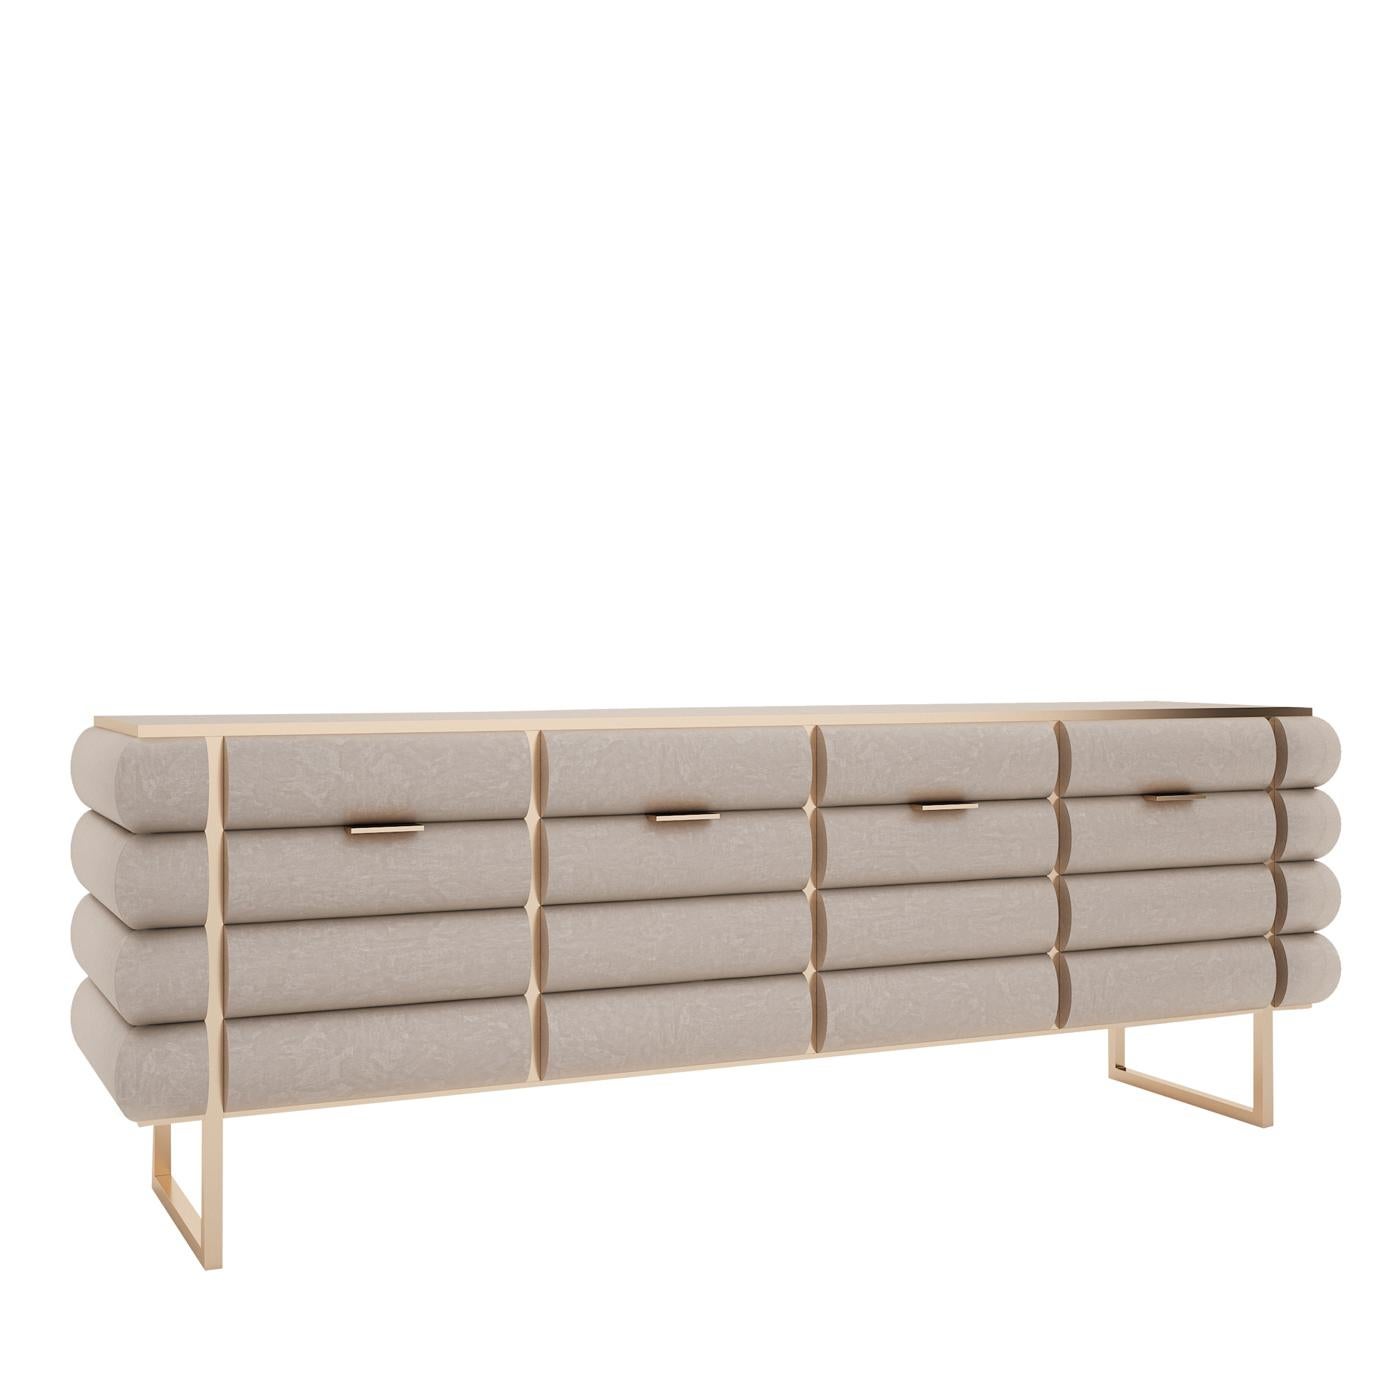 The lavish yet sophisticated flair characterizing this sideboard makes it perfect to be a versatile furniture piece. Sitting atop a brass-finished, light metal base, its wooden silhouette comprises four wide compartments and its surface is enlivened